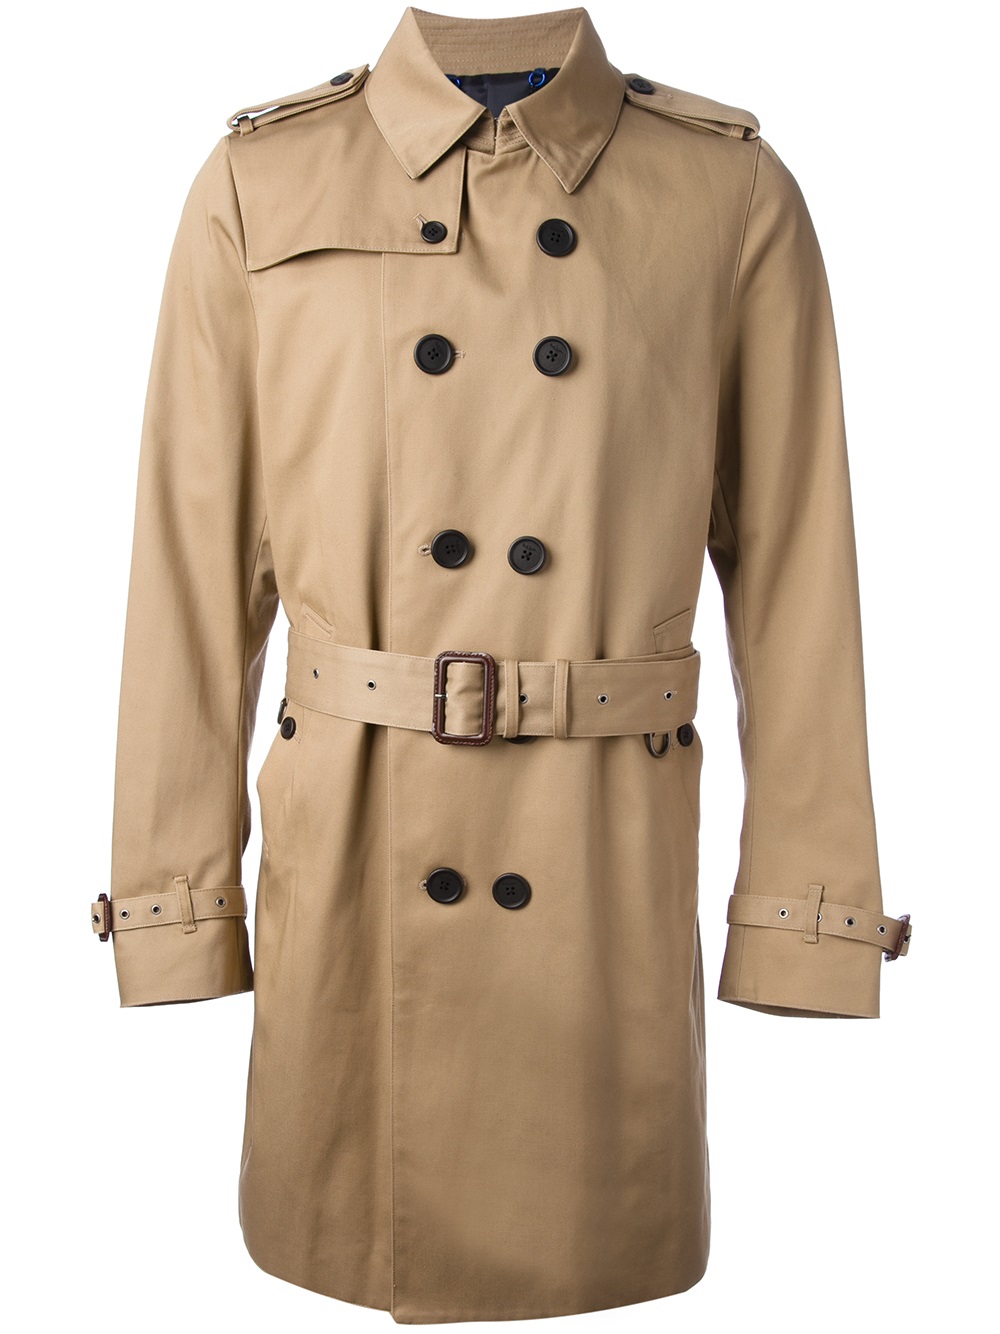 Lyst - Paul Smith Paul Smith Trench Coat in Natural for Men